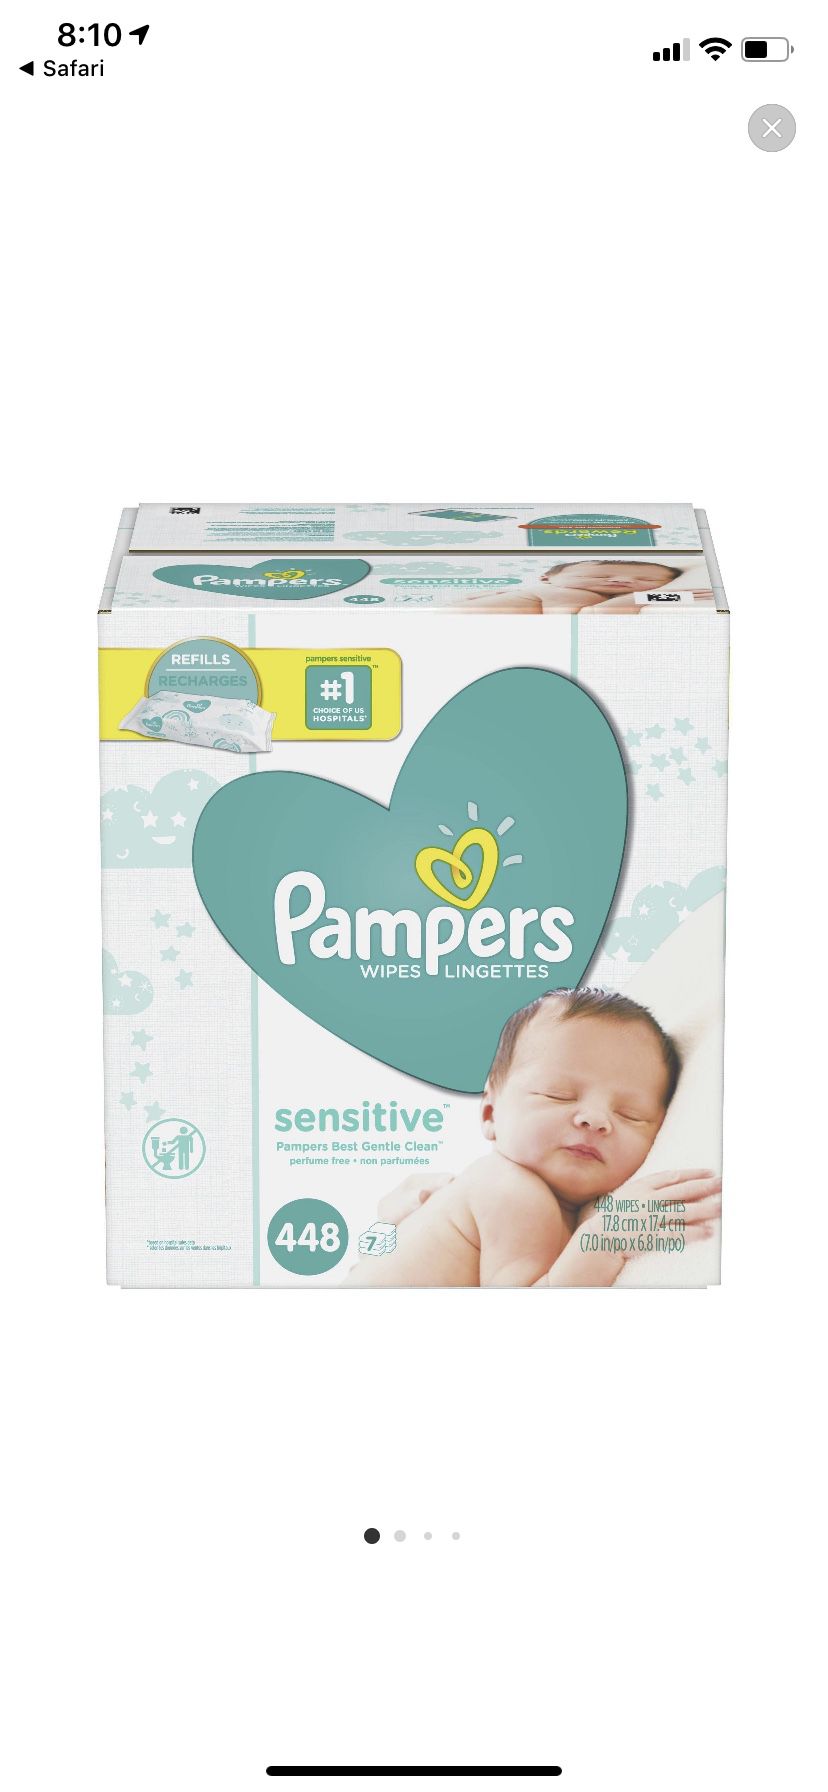 Pampers wipes 448 count